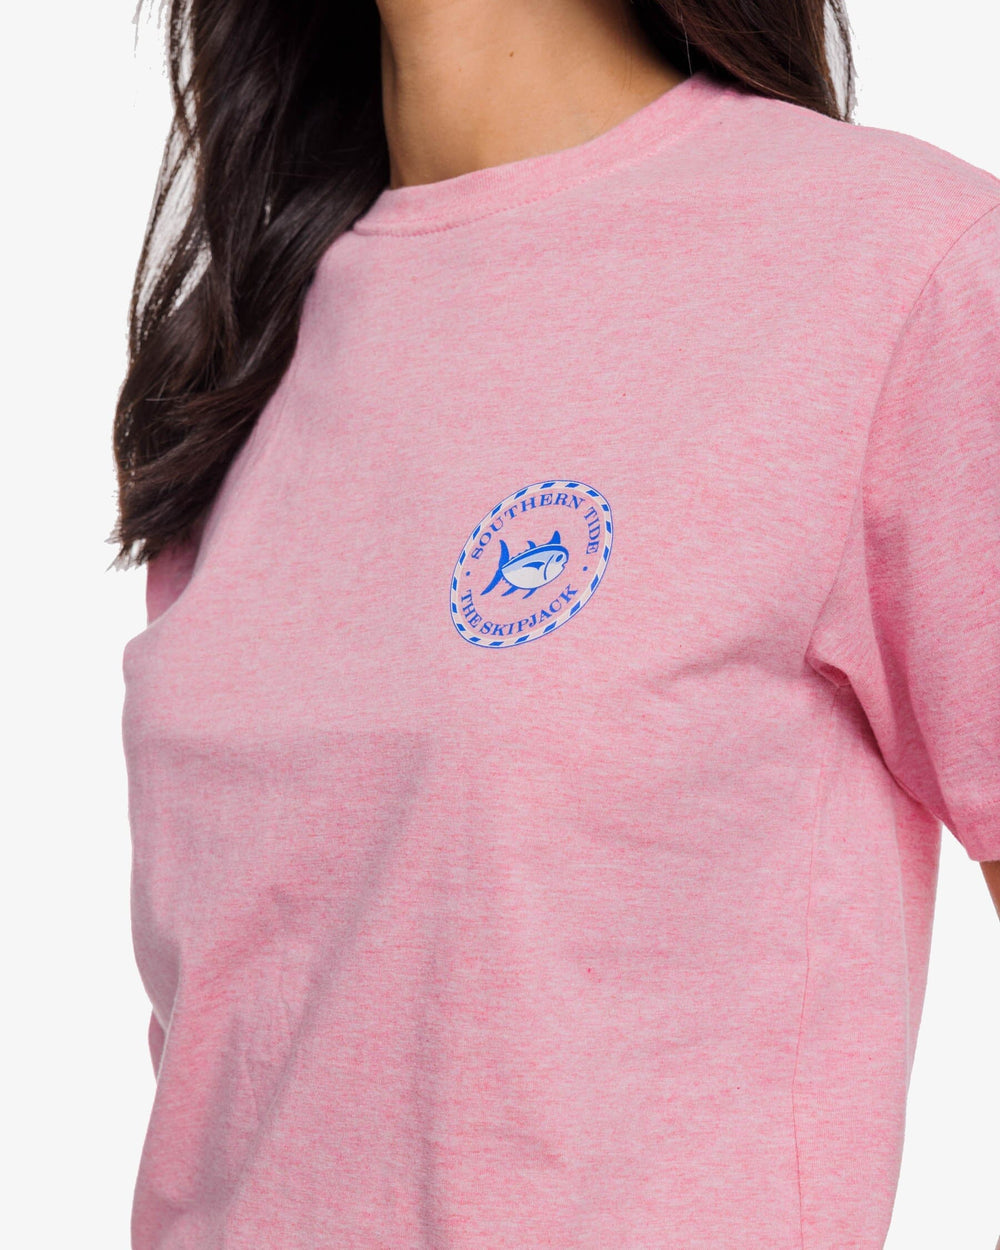 The detail view of the Southern Tide Original Circle Skipjack T-Shirt by Southern Tide - Heather Flamingo Pink